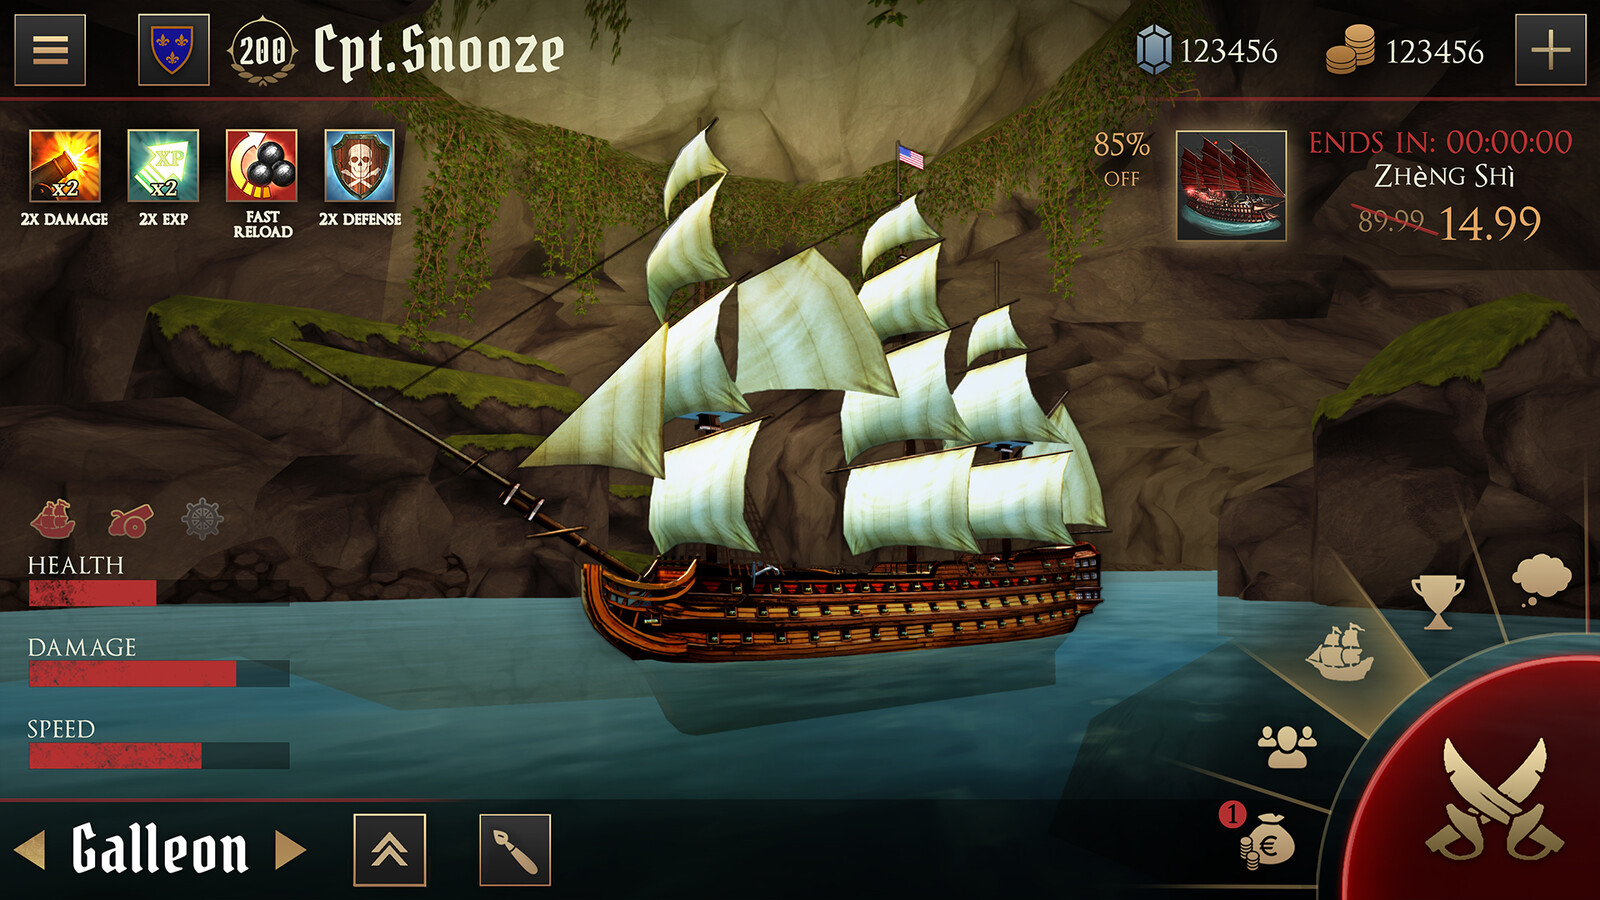 Main Menu/ Pirate lair UI concept for the new Age of Pirates multiplayer game. Most of the icons were placeholders.